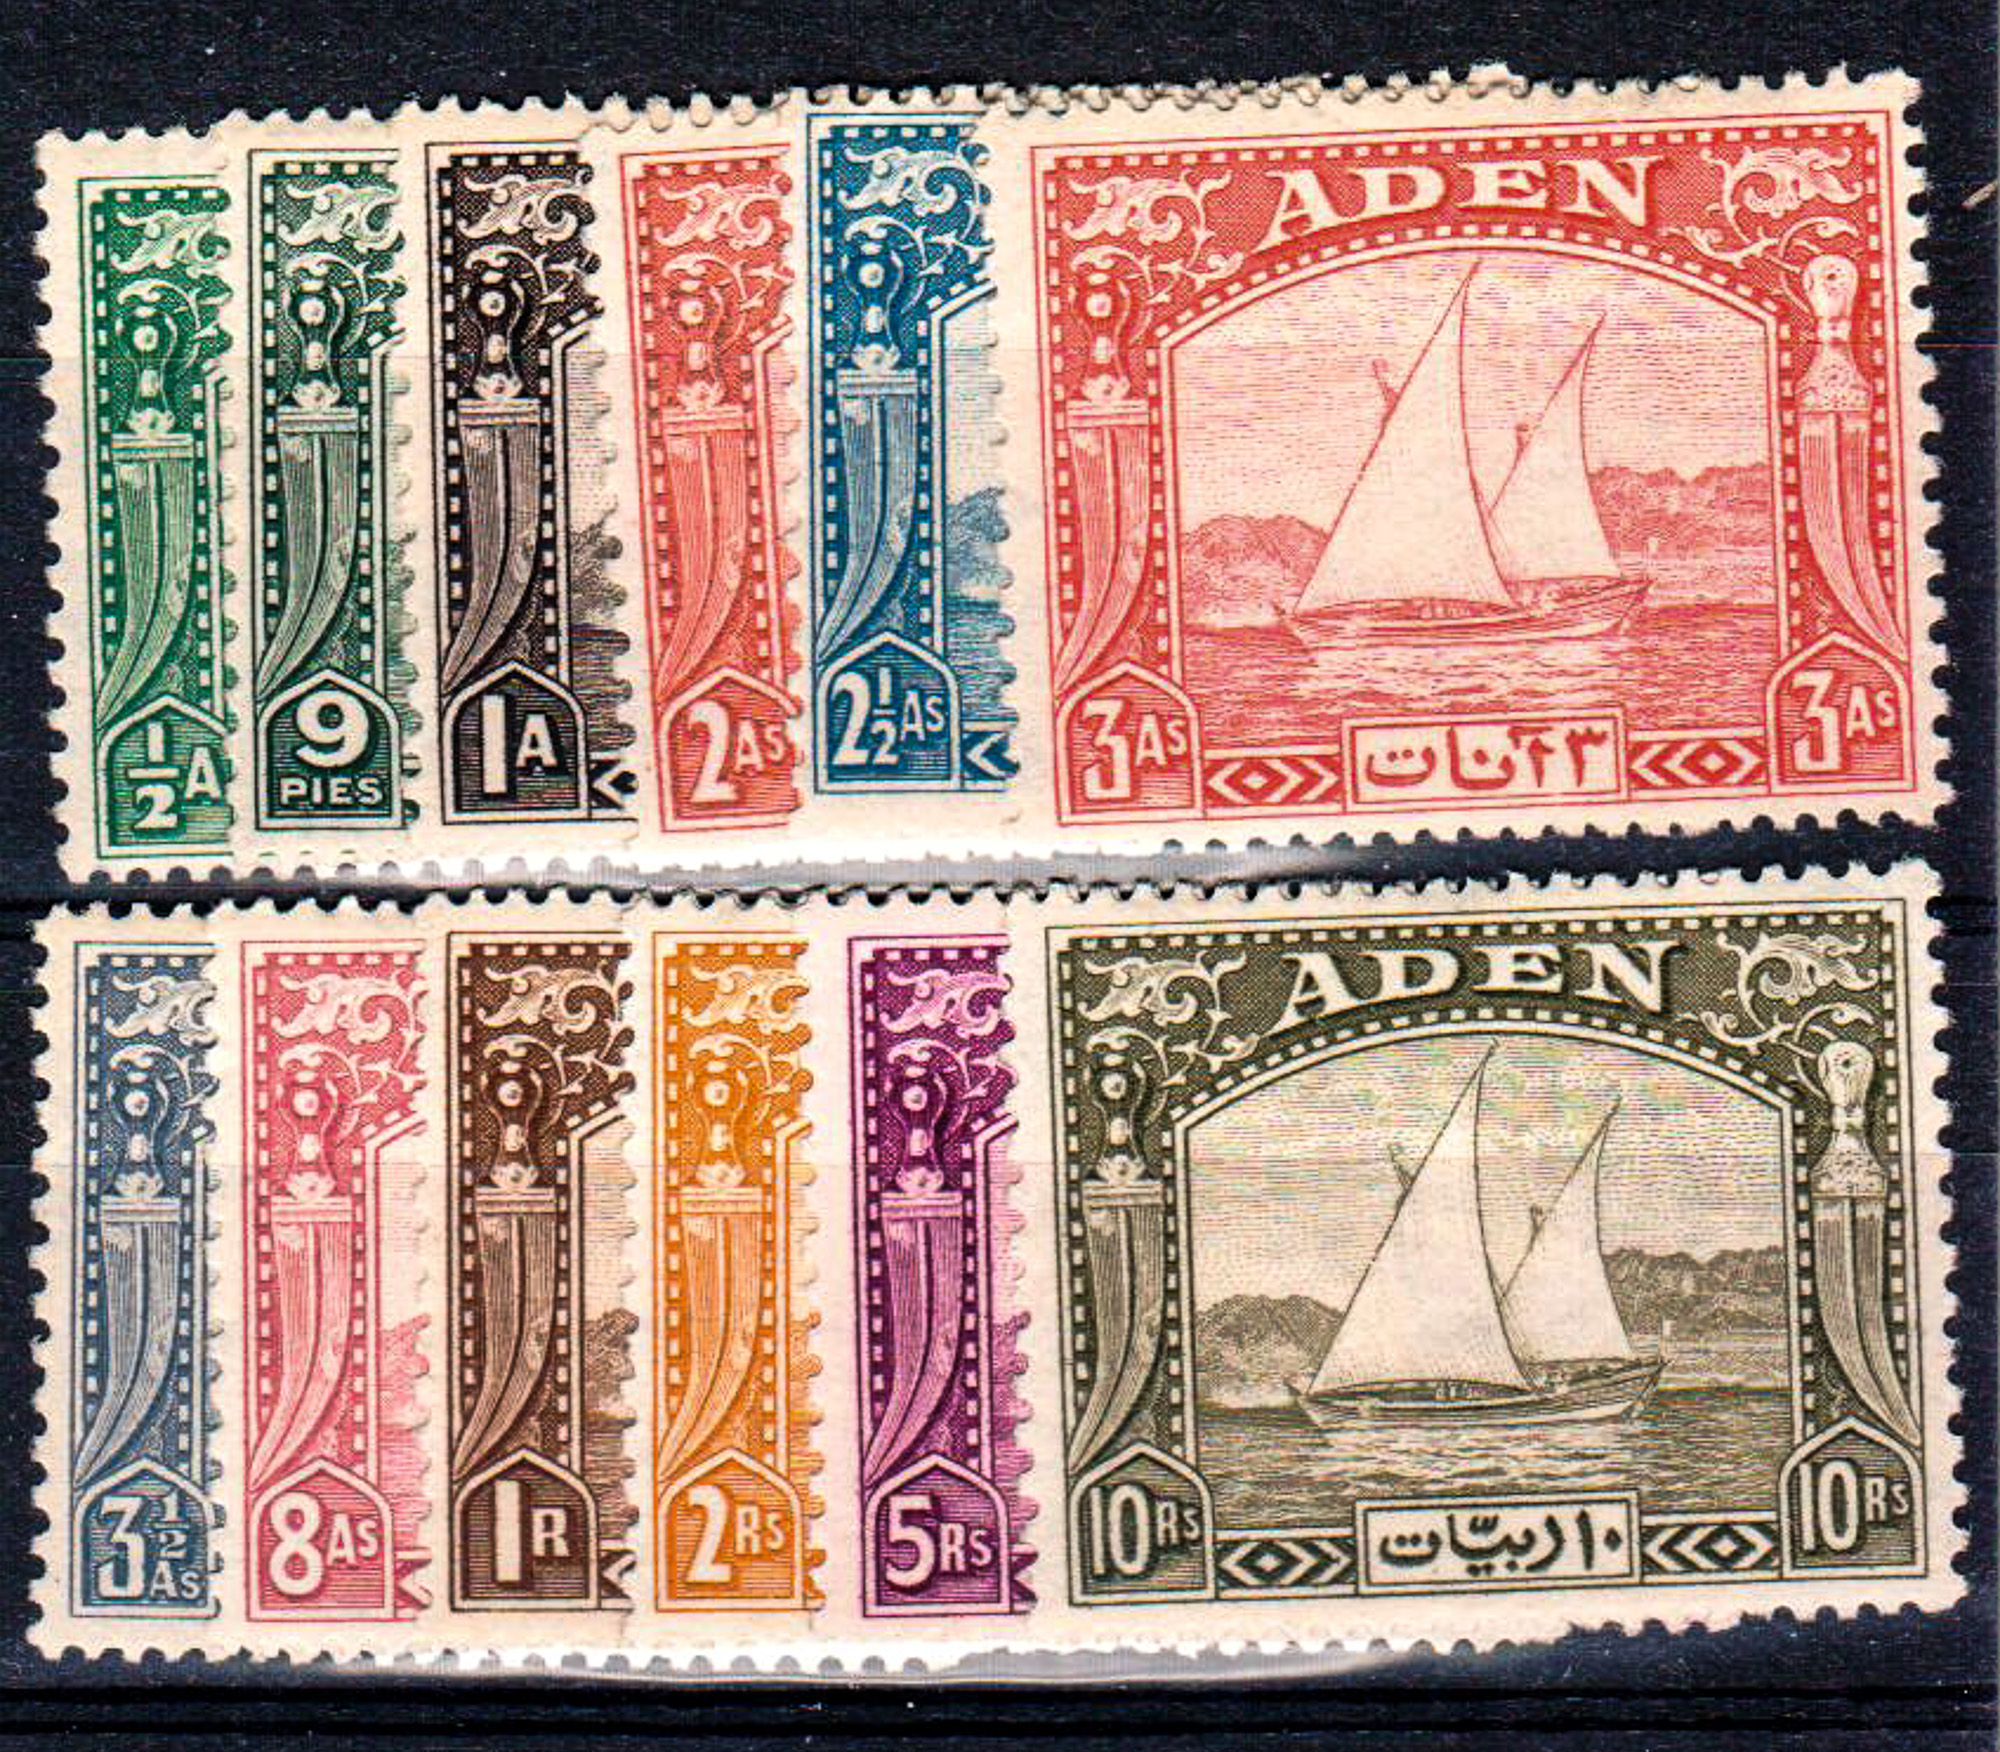 ADEN * 1937 Second set of 12. Very fine lightly mounted mint. SG 1-12. Cat £ 1200. Scarce